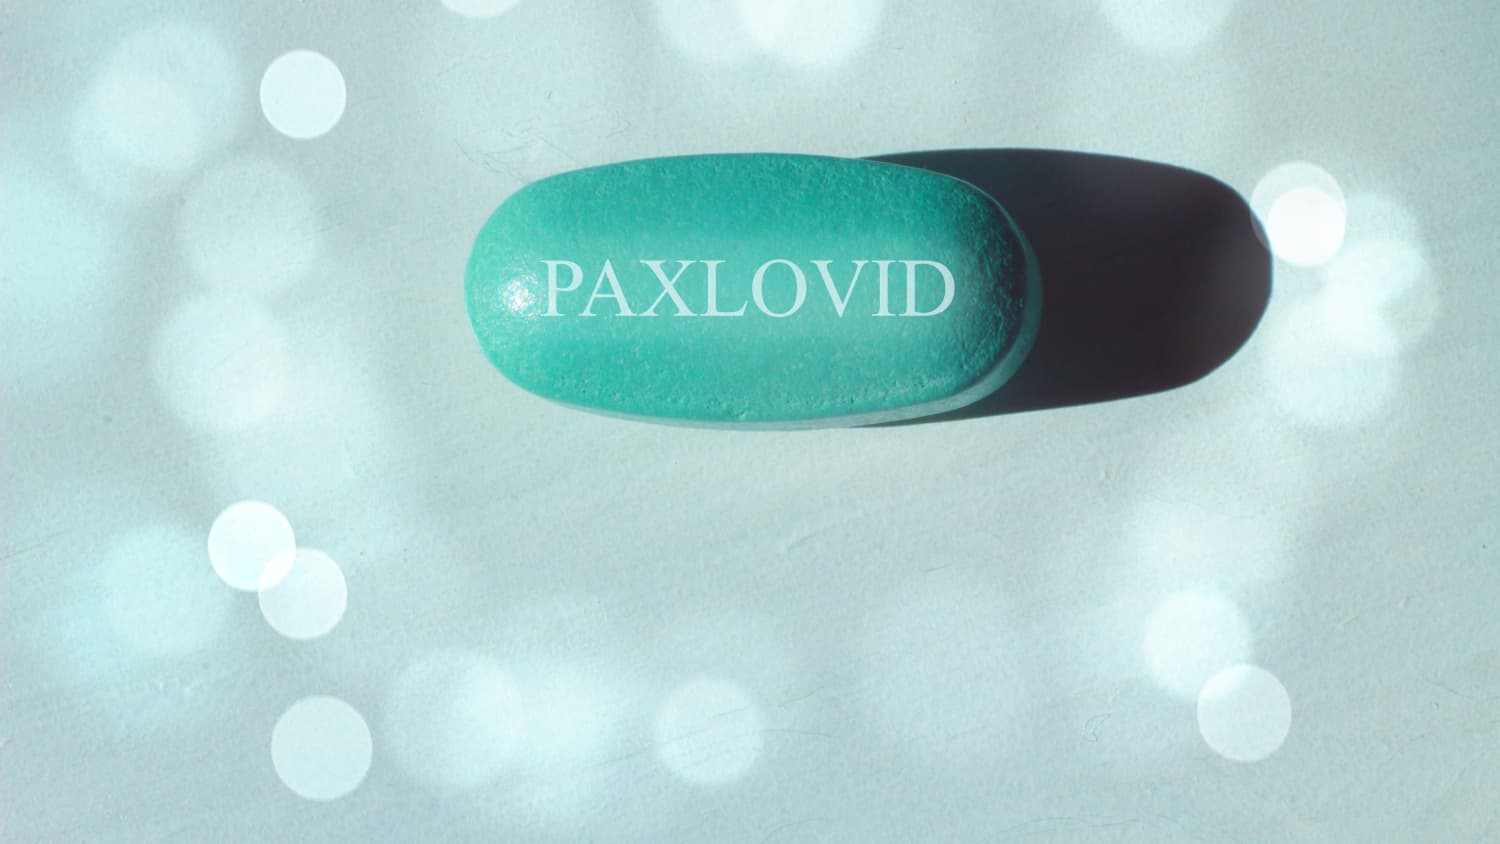 13 Things To Know About Paxlovid, the Latest COVID-19 Pill > News